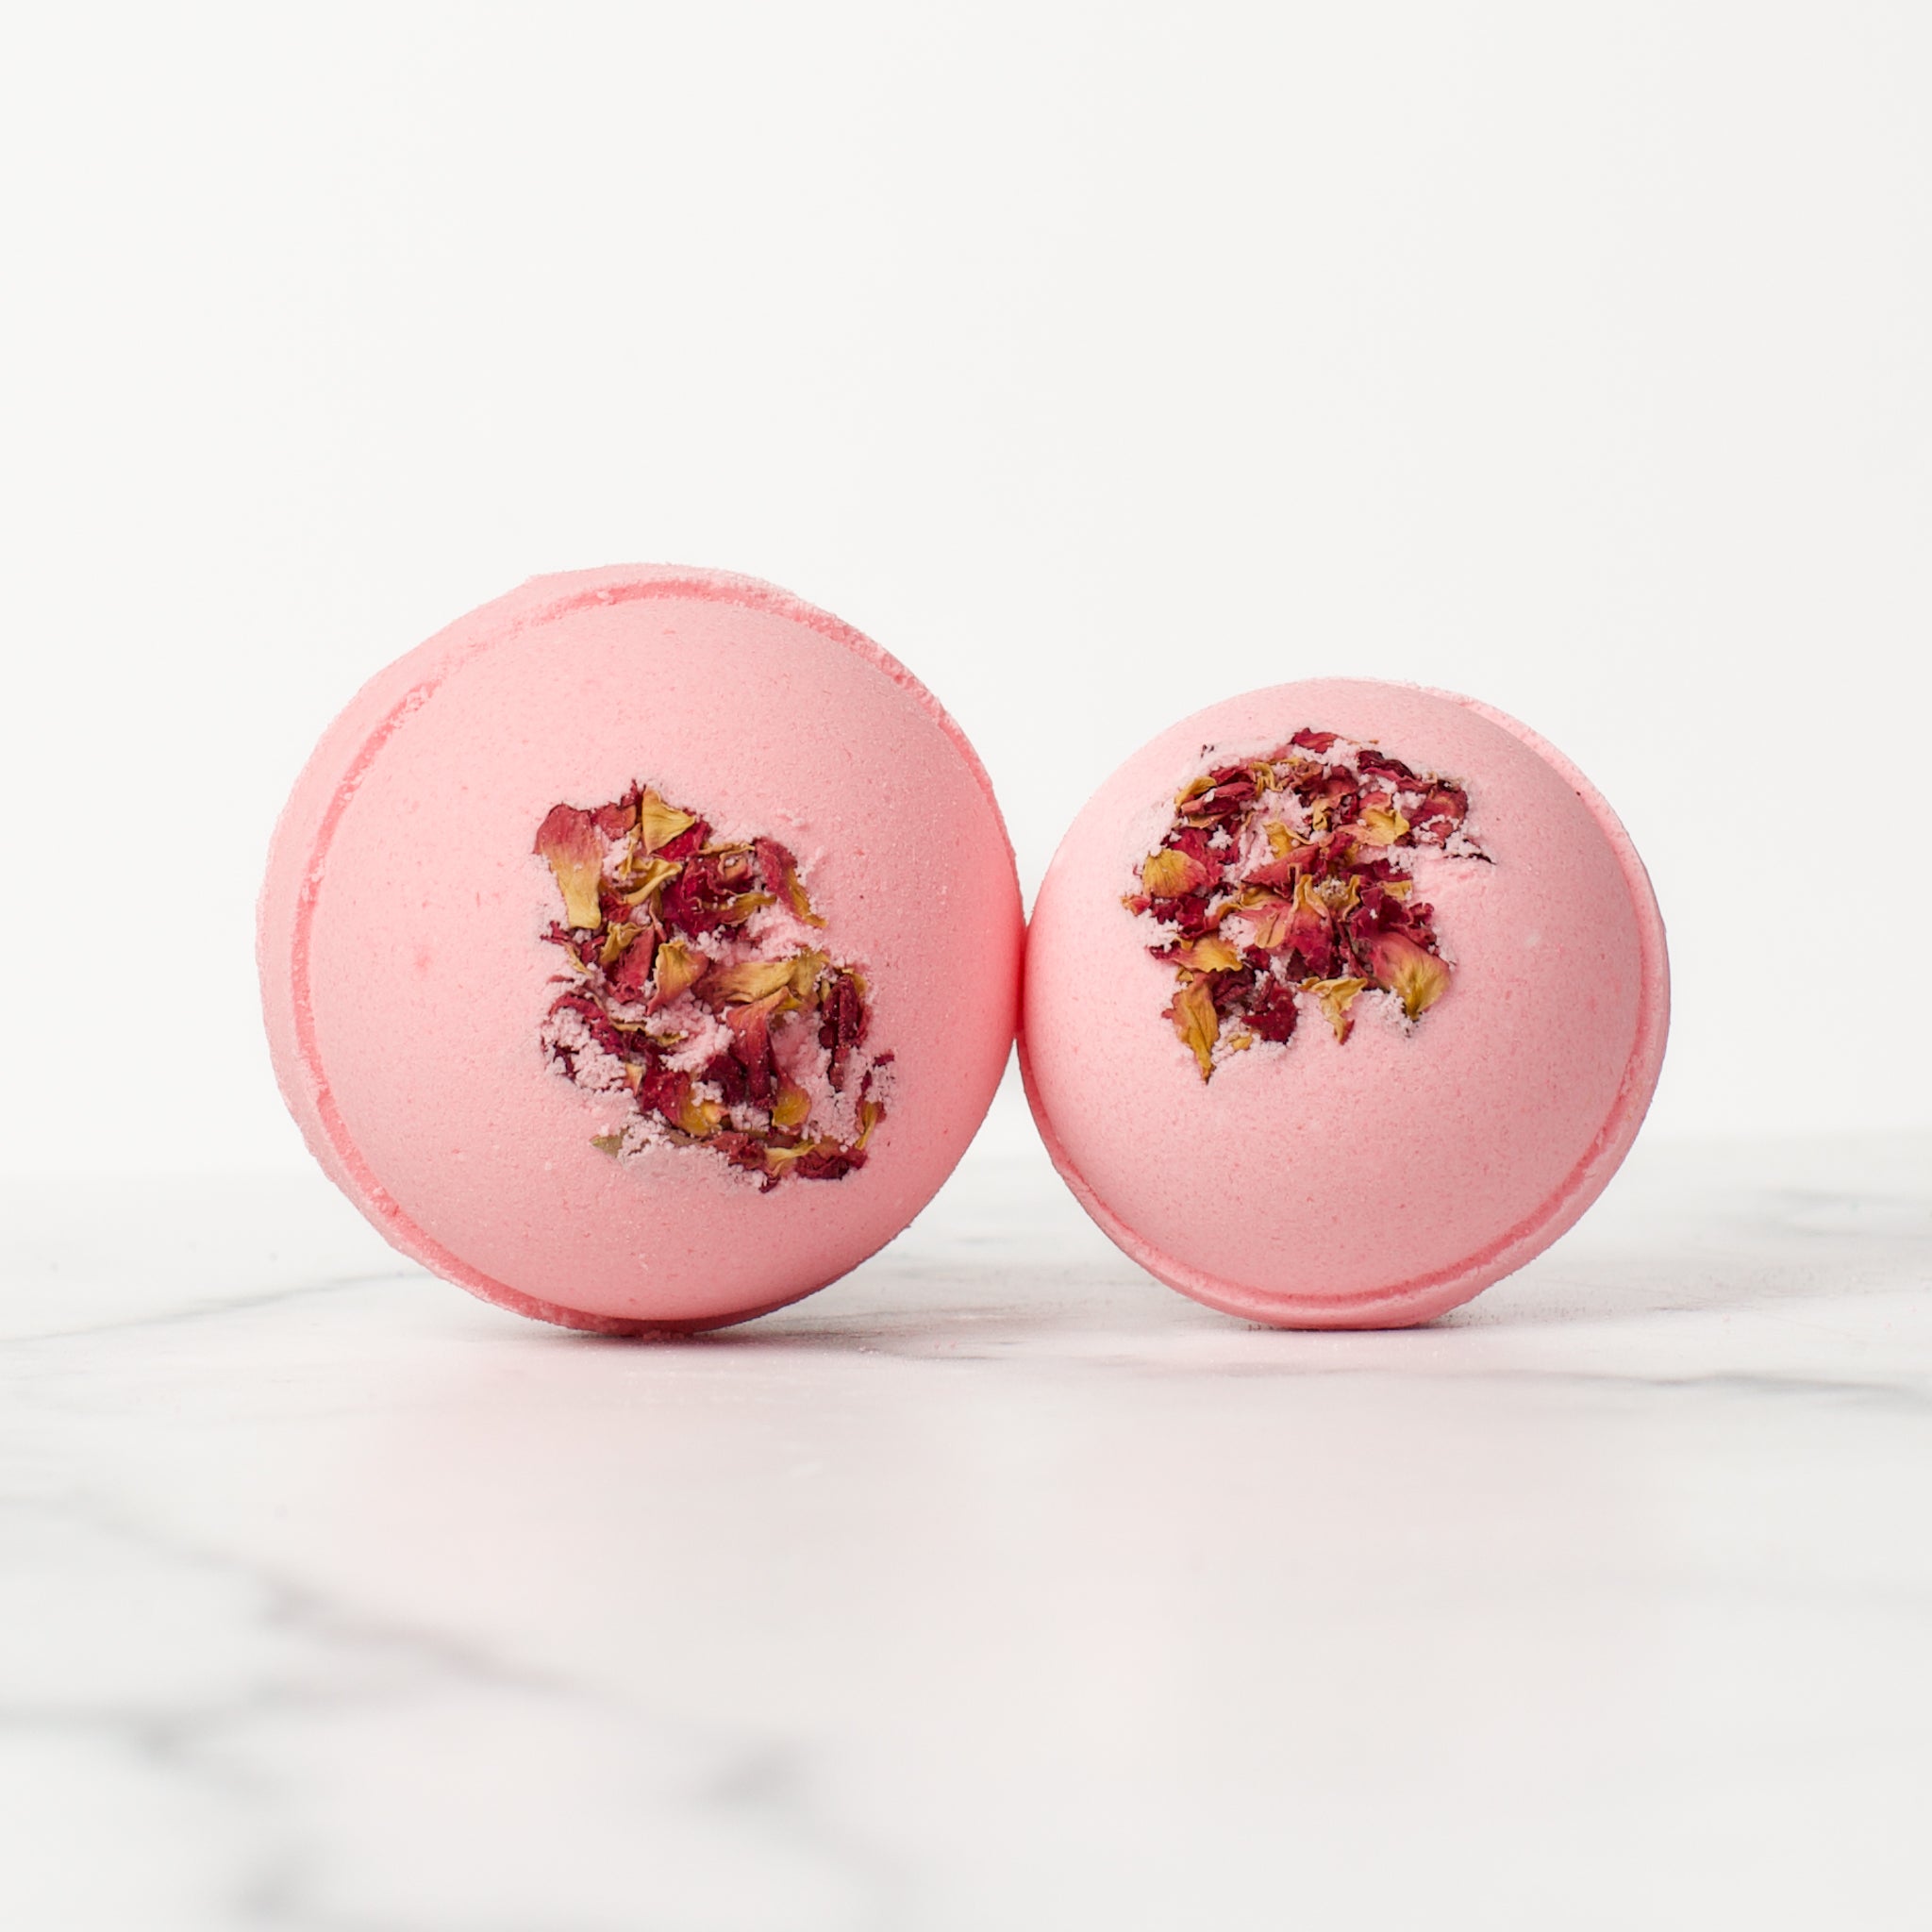 One large and one medium round Lemon Rose bath bombs on a white background. Lemon Rose is a light pink bath bomb with rose petals embedded on the top..